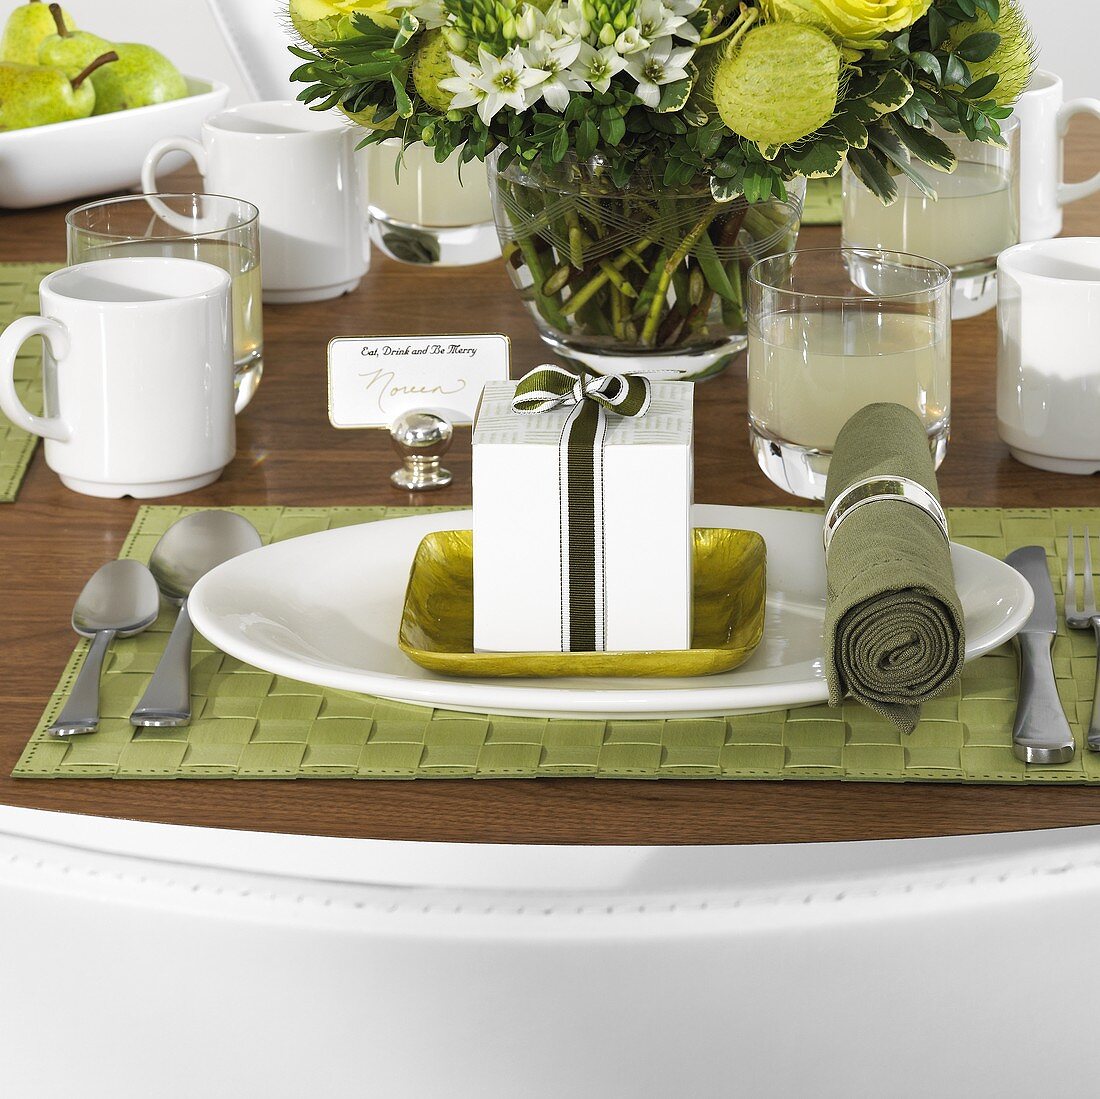 Table laid in green and white with flowers and lemonade